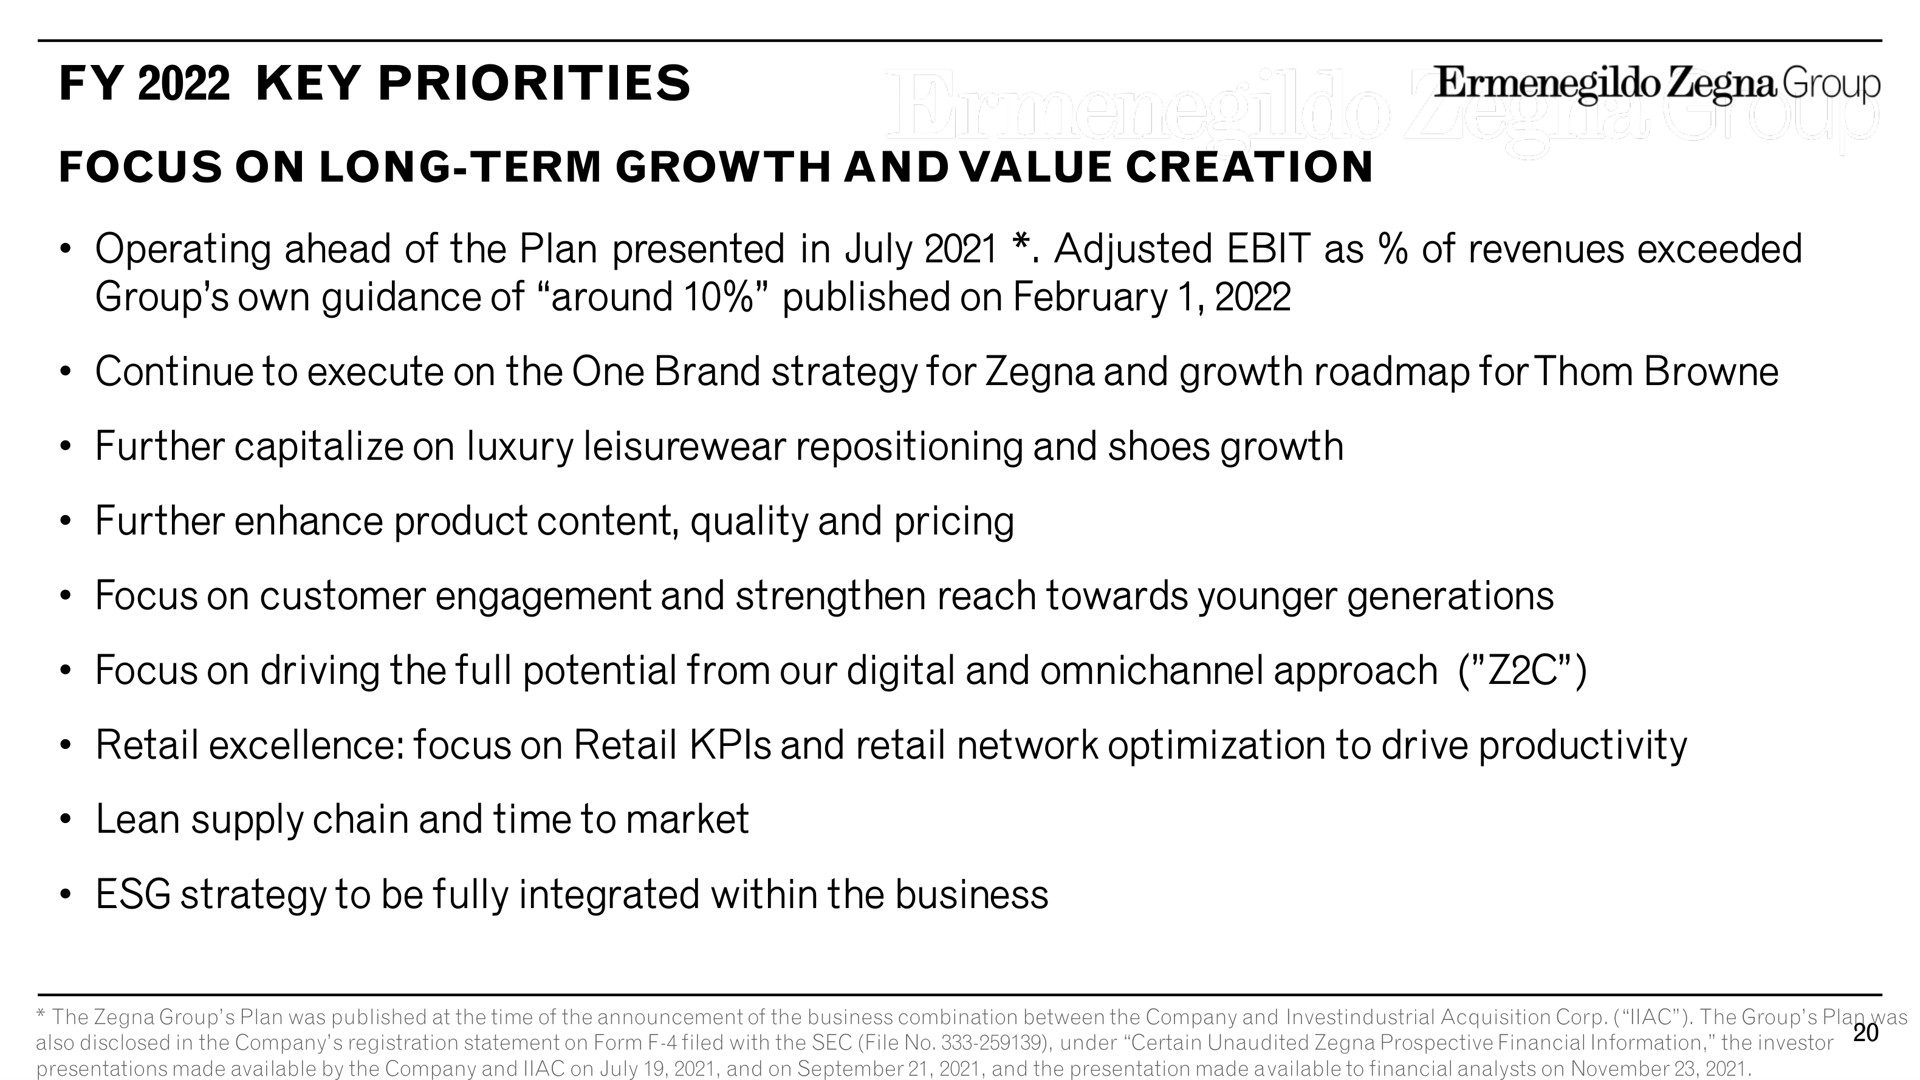 key priorities focus on long term growth and value creation operating ahead of the plan presented in adjusted as of revenues exceeded group own guidance of around published on continue to execute on the one brand strategy for and growth further capitalize on luxury repositioning and shoes growth further enhance product content quality and pricing focus on customer engagement and strengthen reach towards younger generations focus on driving the full potential from our digital and approach retail excellence focus on retail and retail network optimization to drive productivity lean supply chain and time to market strategy to be fully integrated within the business | Zegna